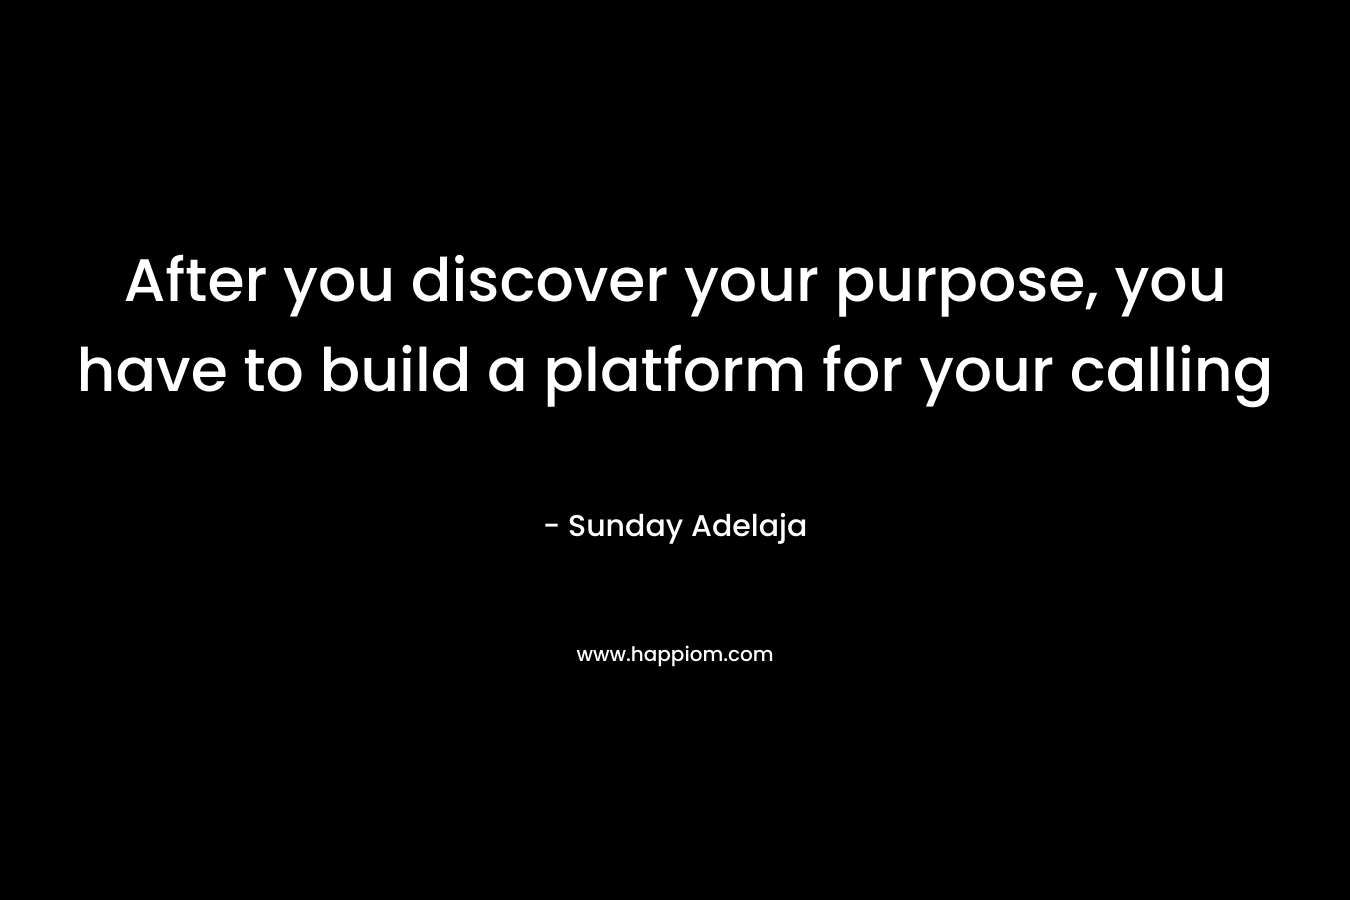 After you discover your purpose, you have to build a platform for your calling